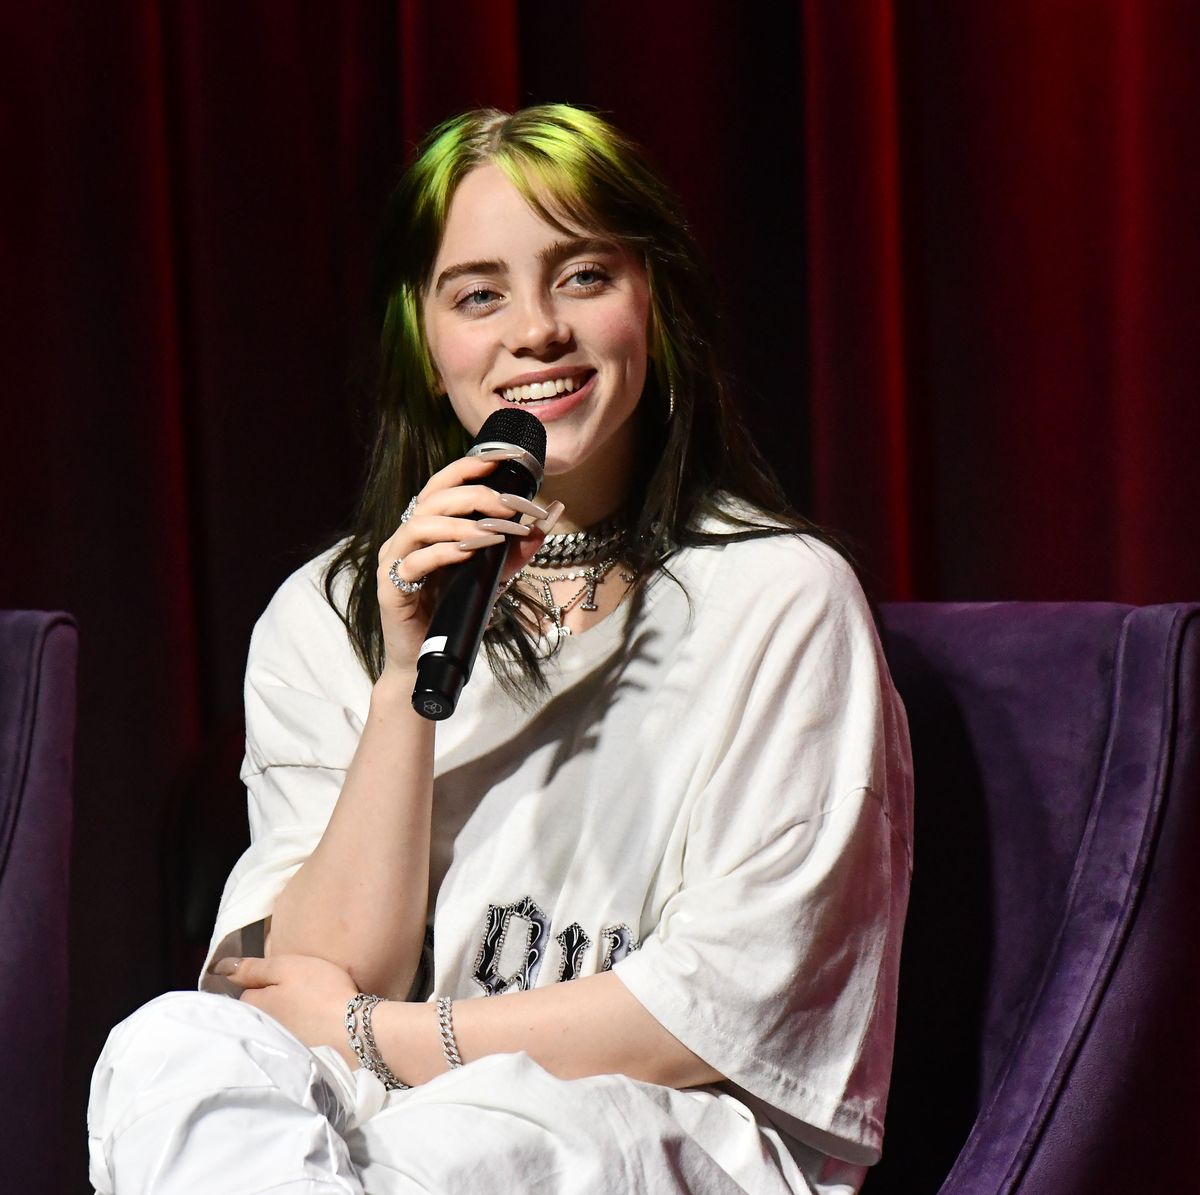 Billie Eilish Is Performing at the 2022 Grammy Awards